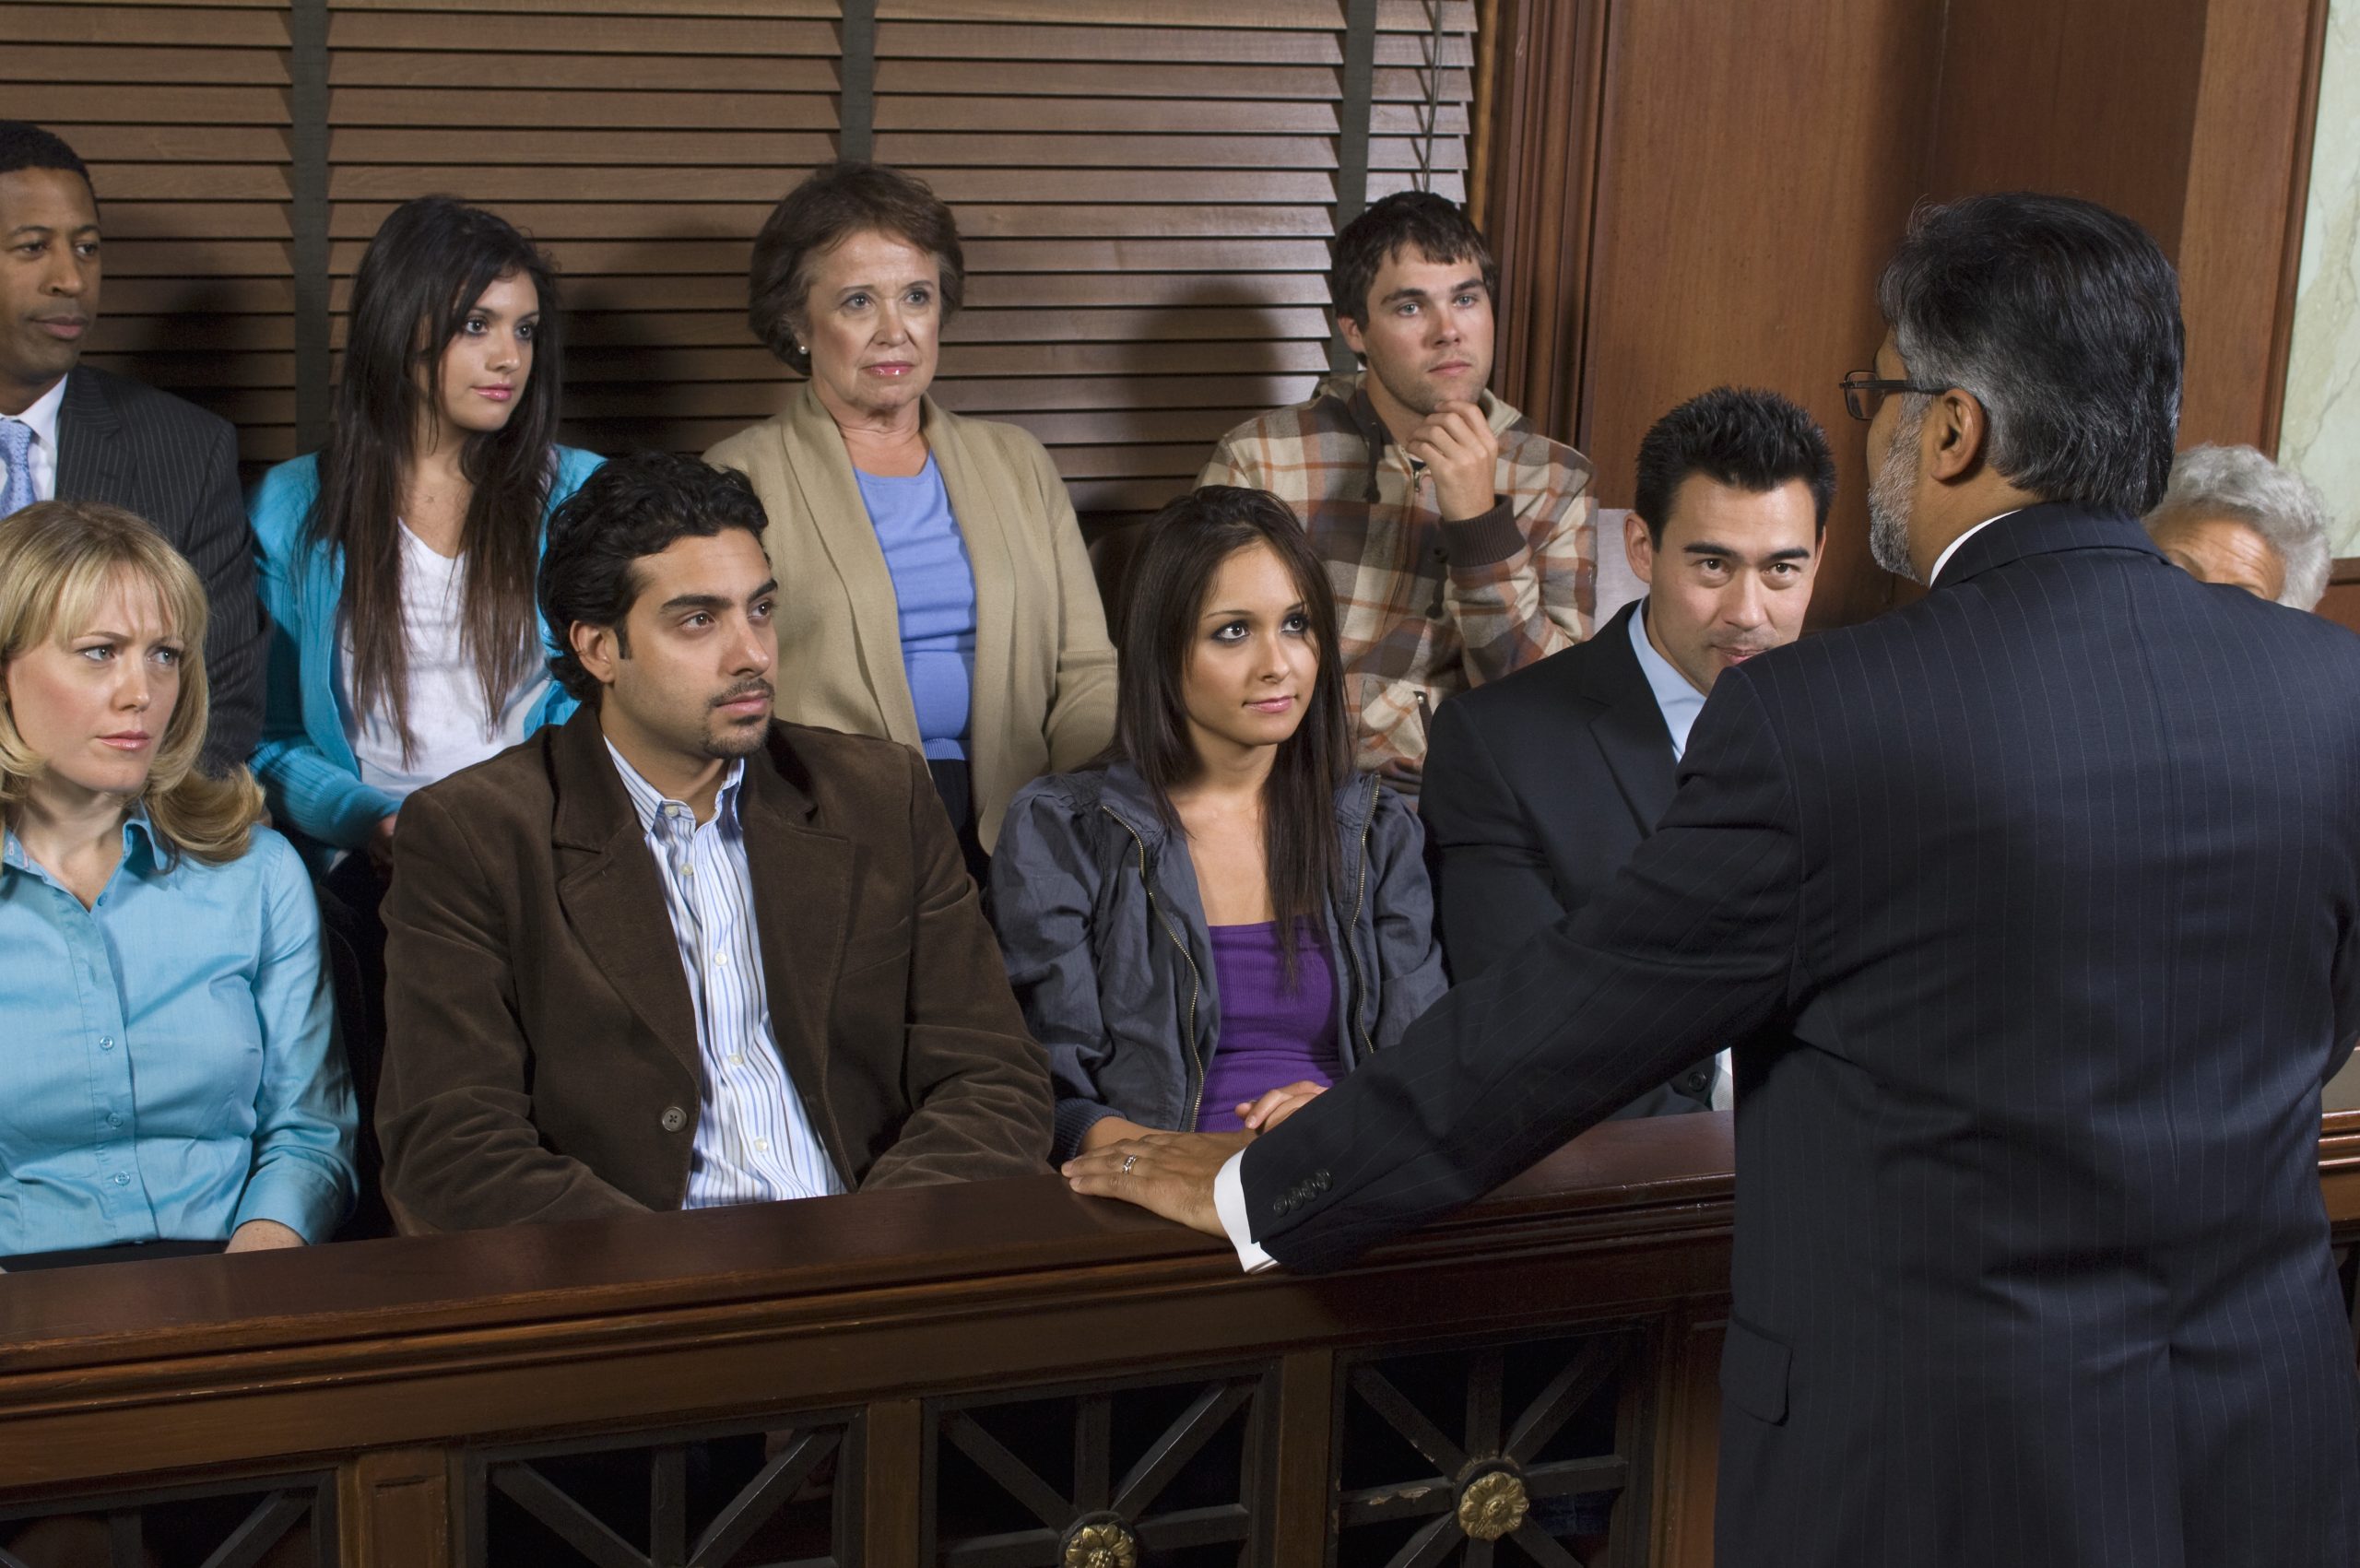 Emotions in the Courtroom